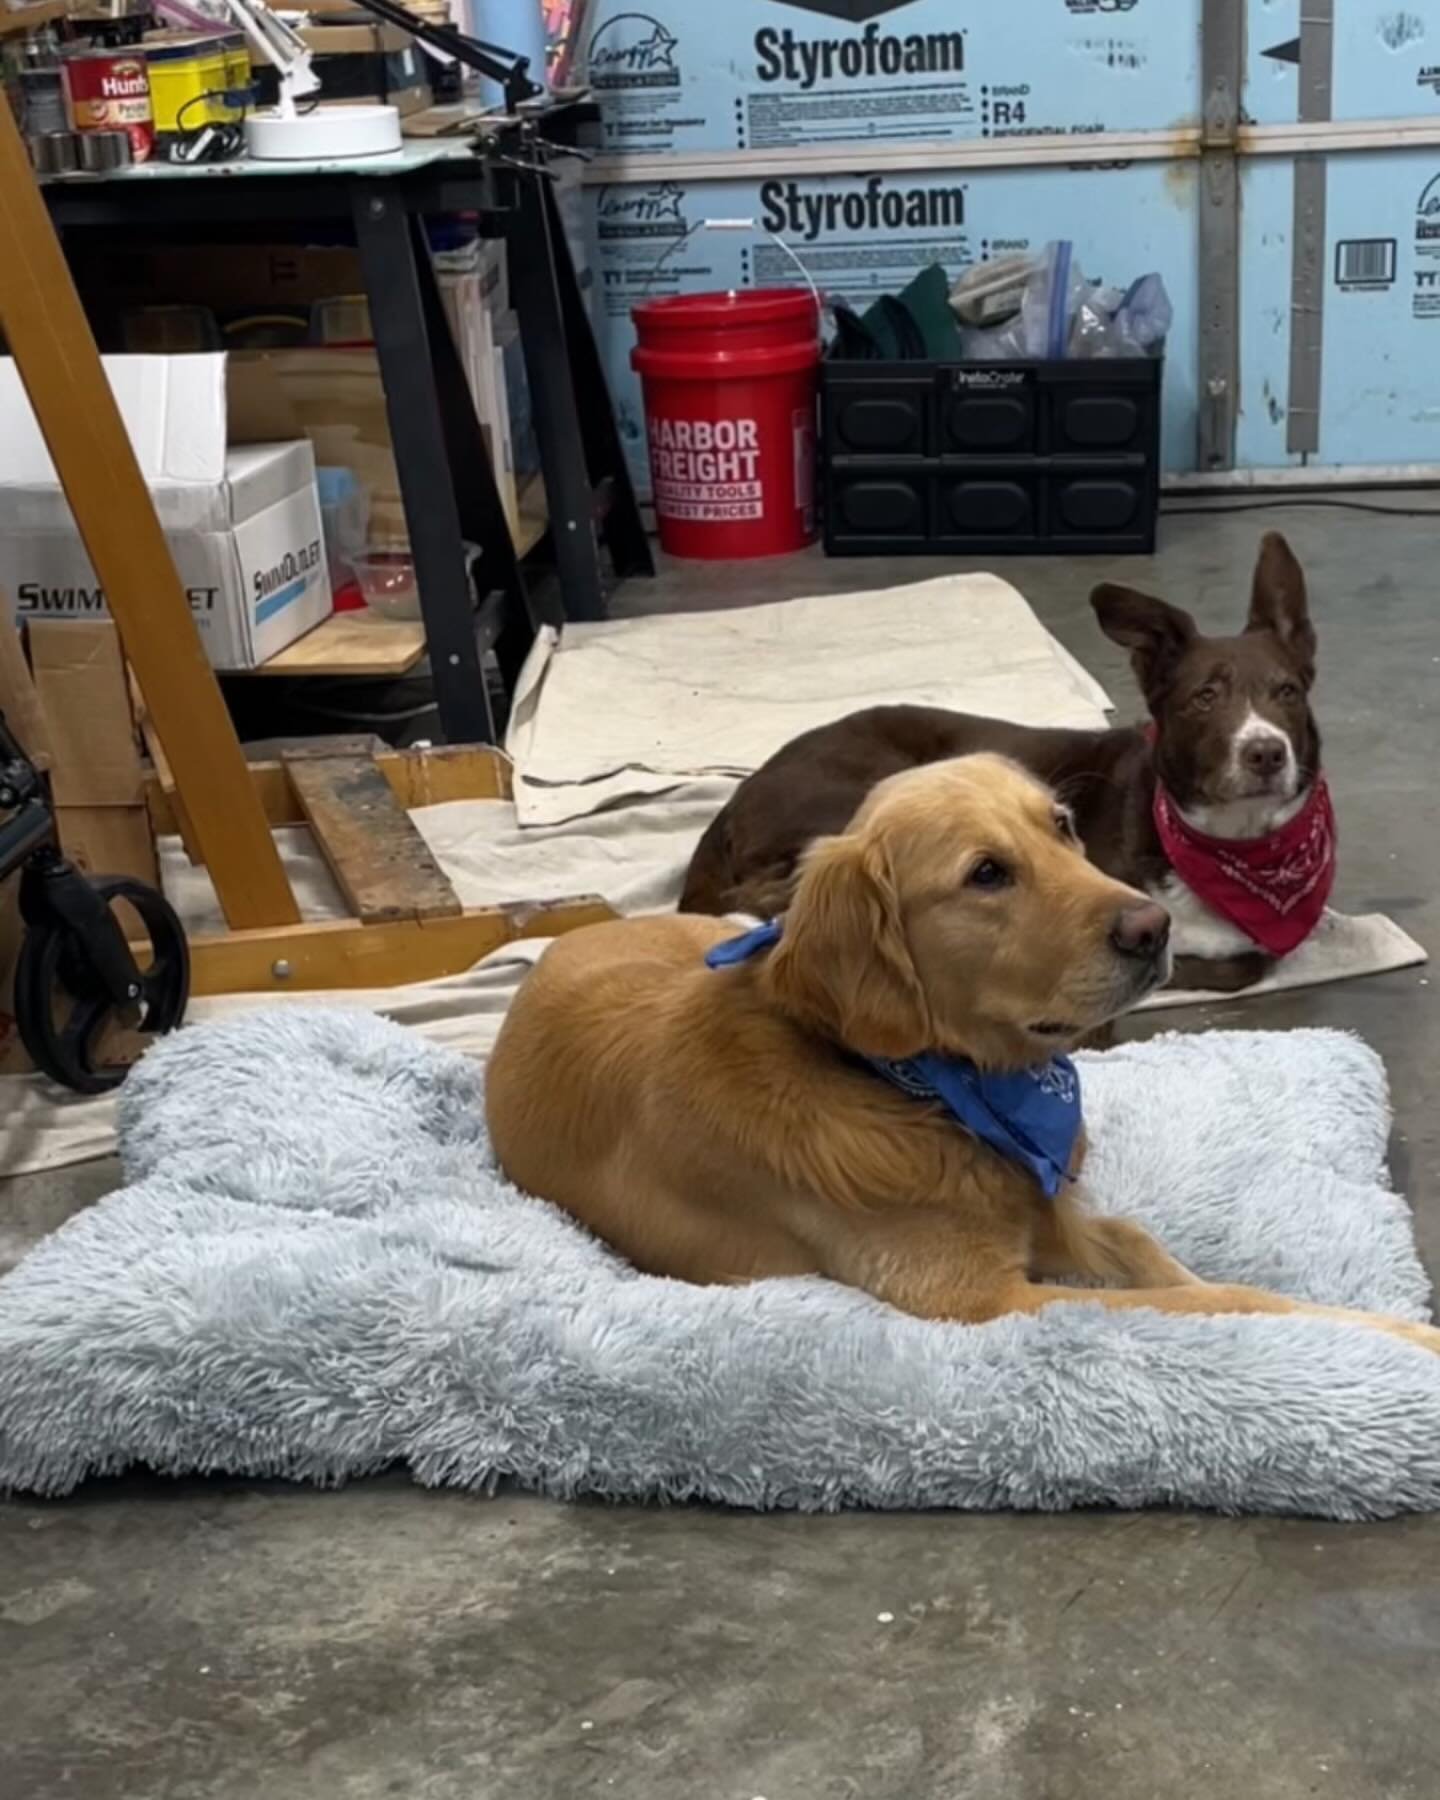 My studio dogs / service dogs are checking in to see if you have any biscuits in your pockets. 

accessibility: A photo of Rico, a golden retriever wearing a blue bandana, and Rosie, a border collie mix wearing a red bandana, sitting in Ashley&rsquo;